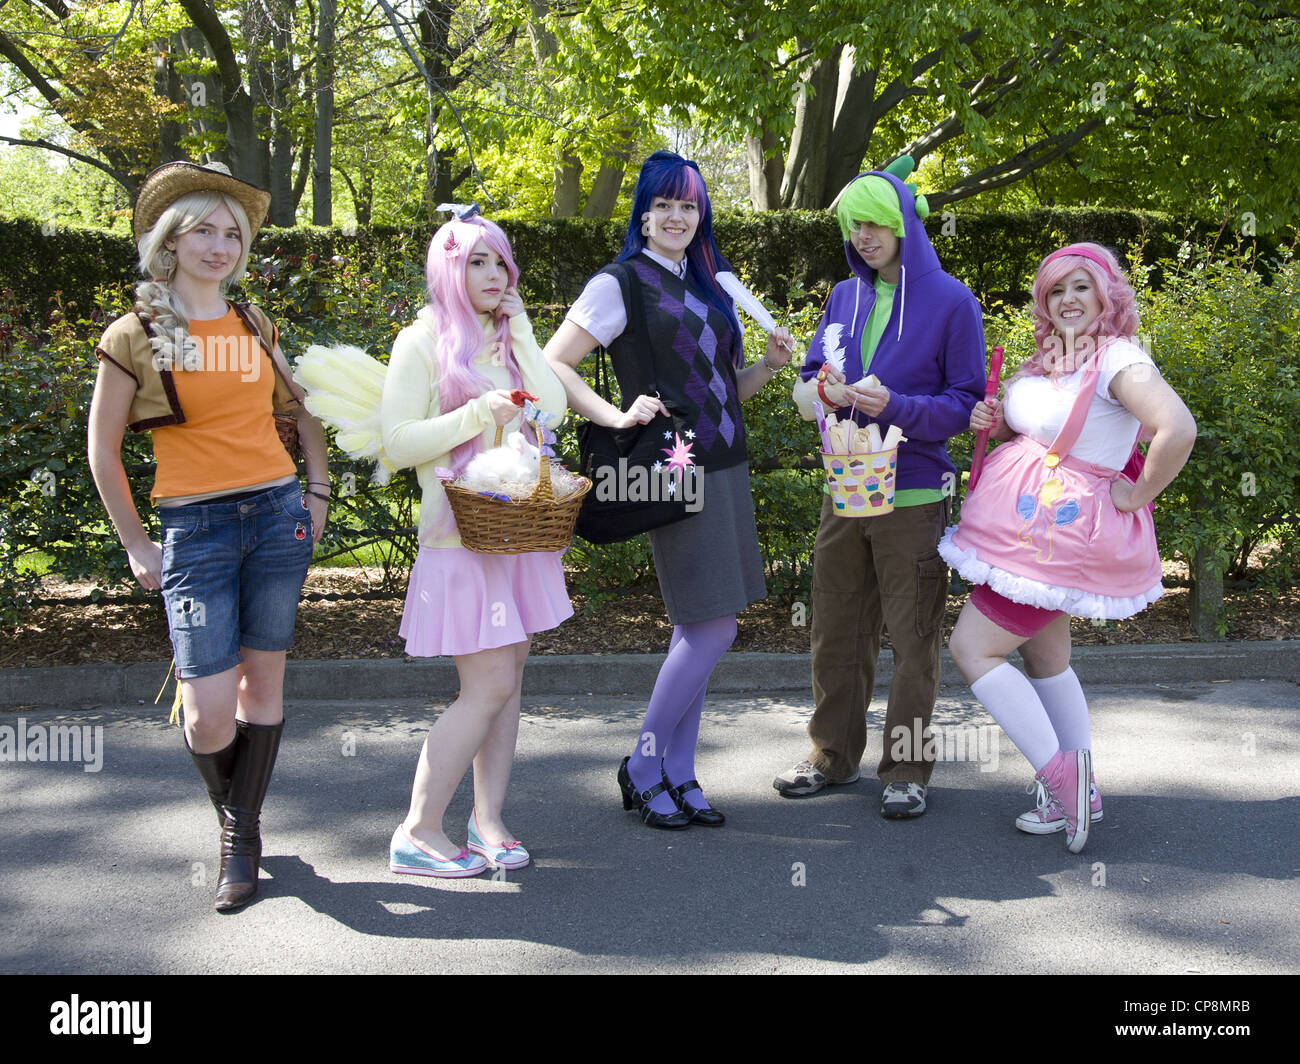 Group of young people dressed up for the Anime festival at the Brooklyn Botanic Garden Stock Photo